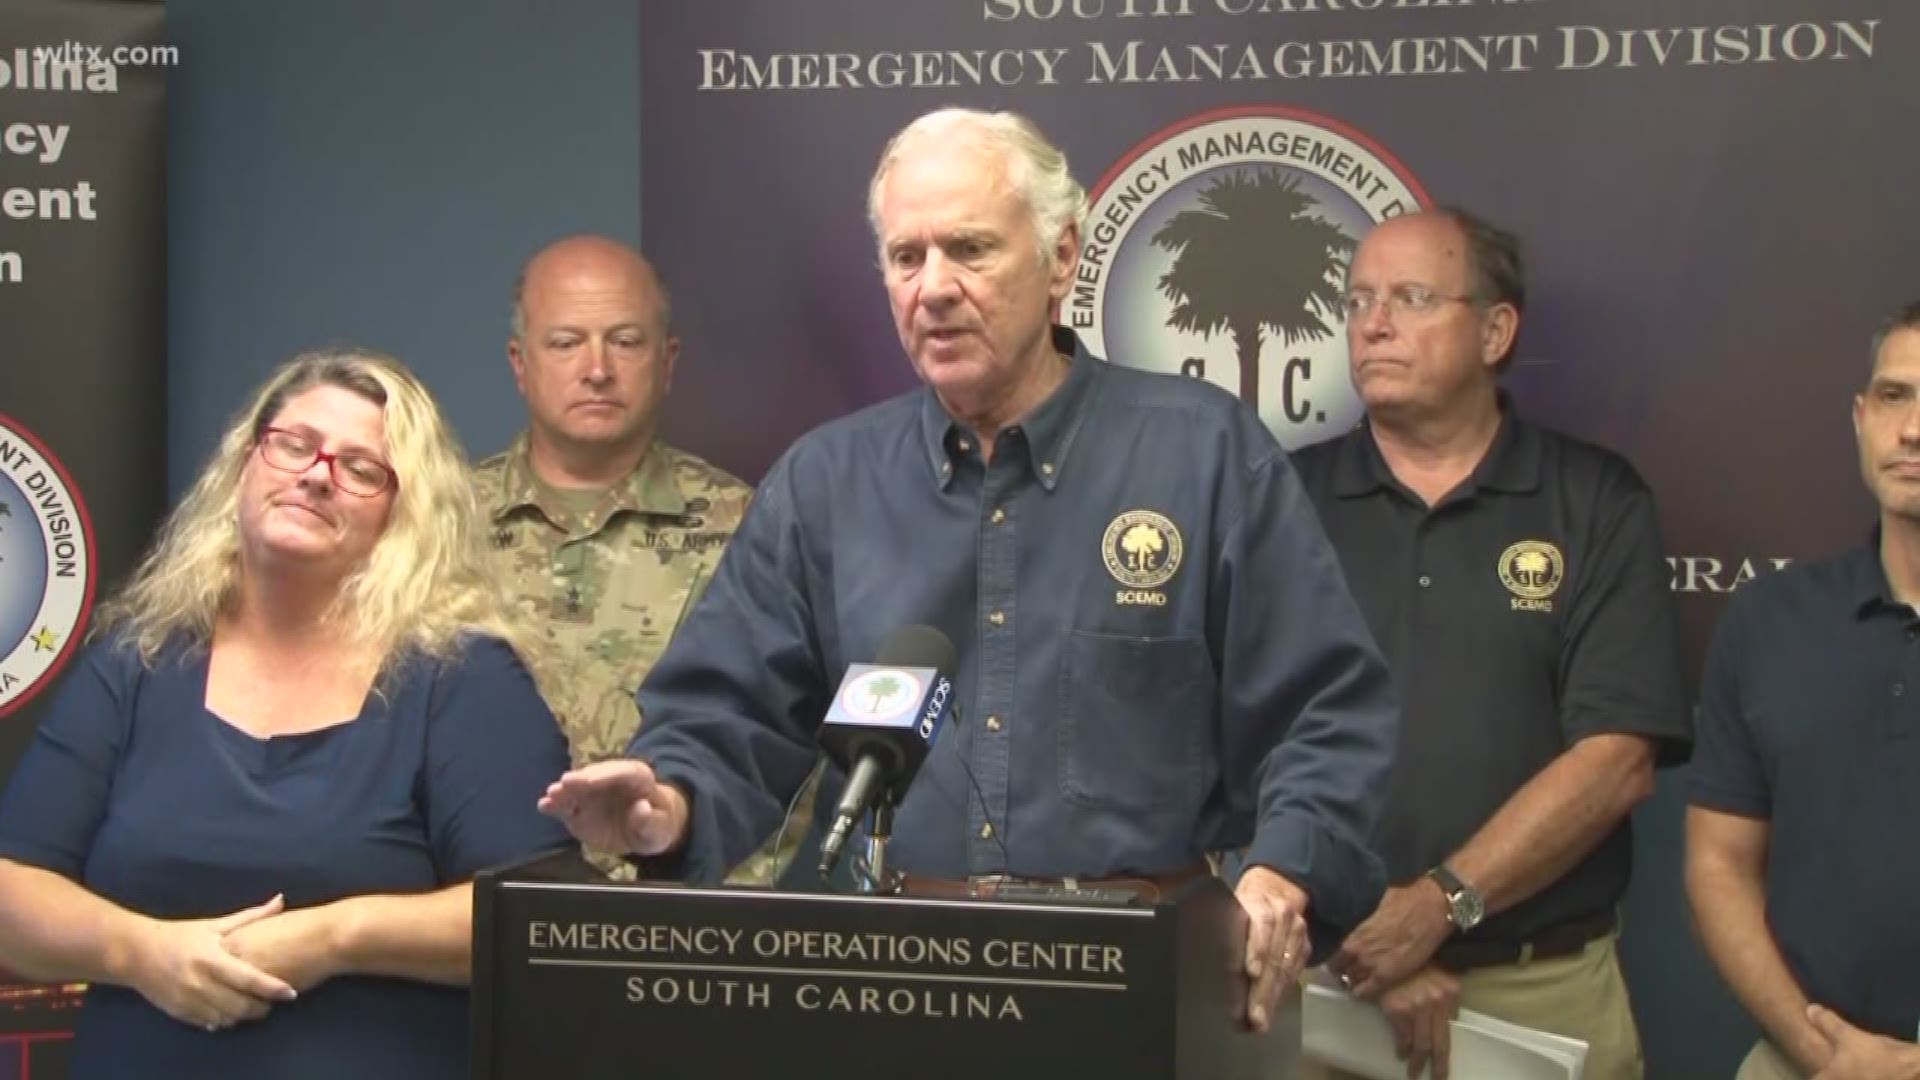 SC Governor Henry McMaster held a briefing about the state's plans for Hurricane Florence, which could impact the state.